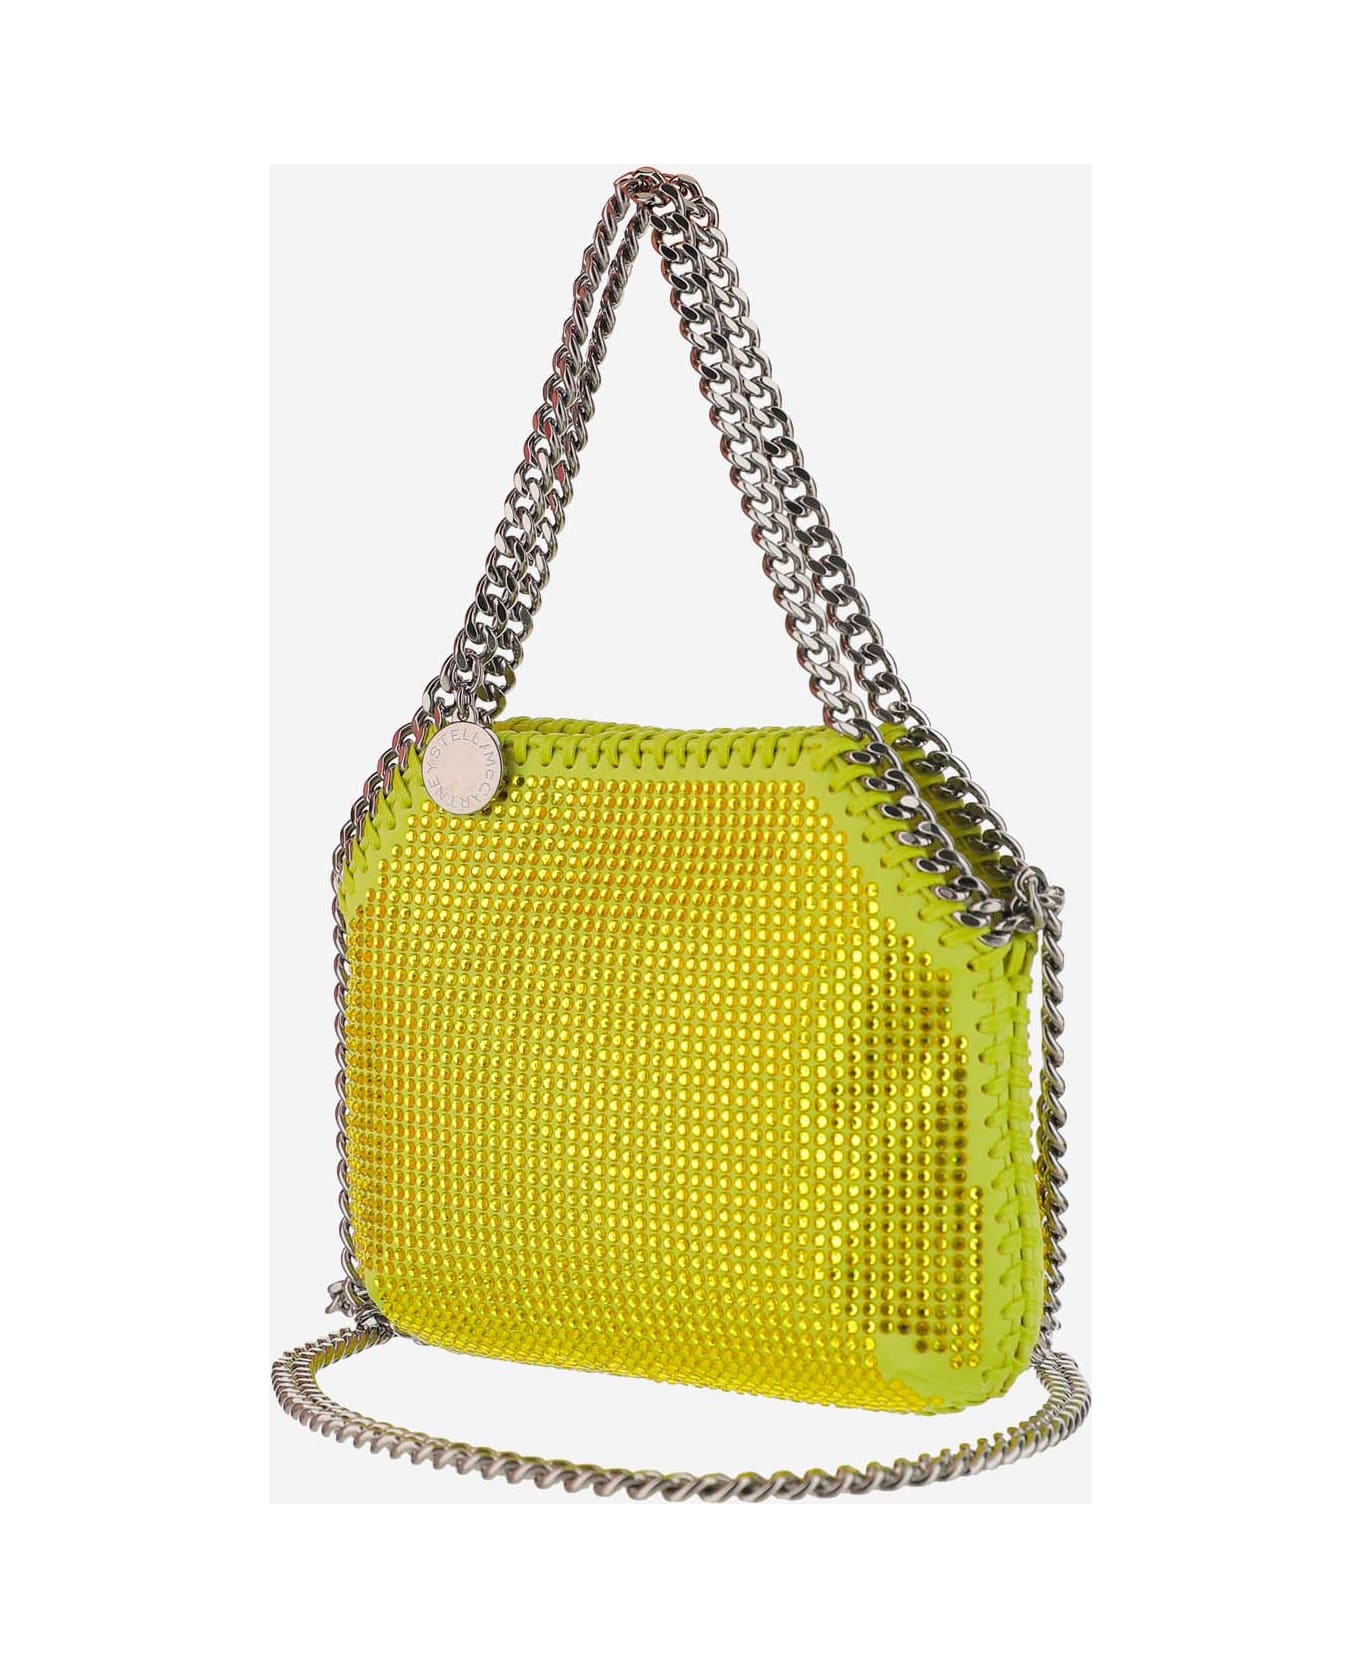 Stella McCartney Mini Shoulder Bag With All-over Crystals - Oxide Yellow